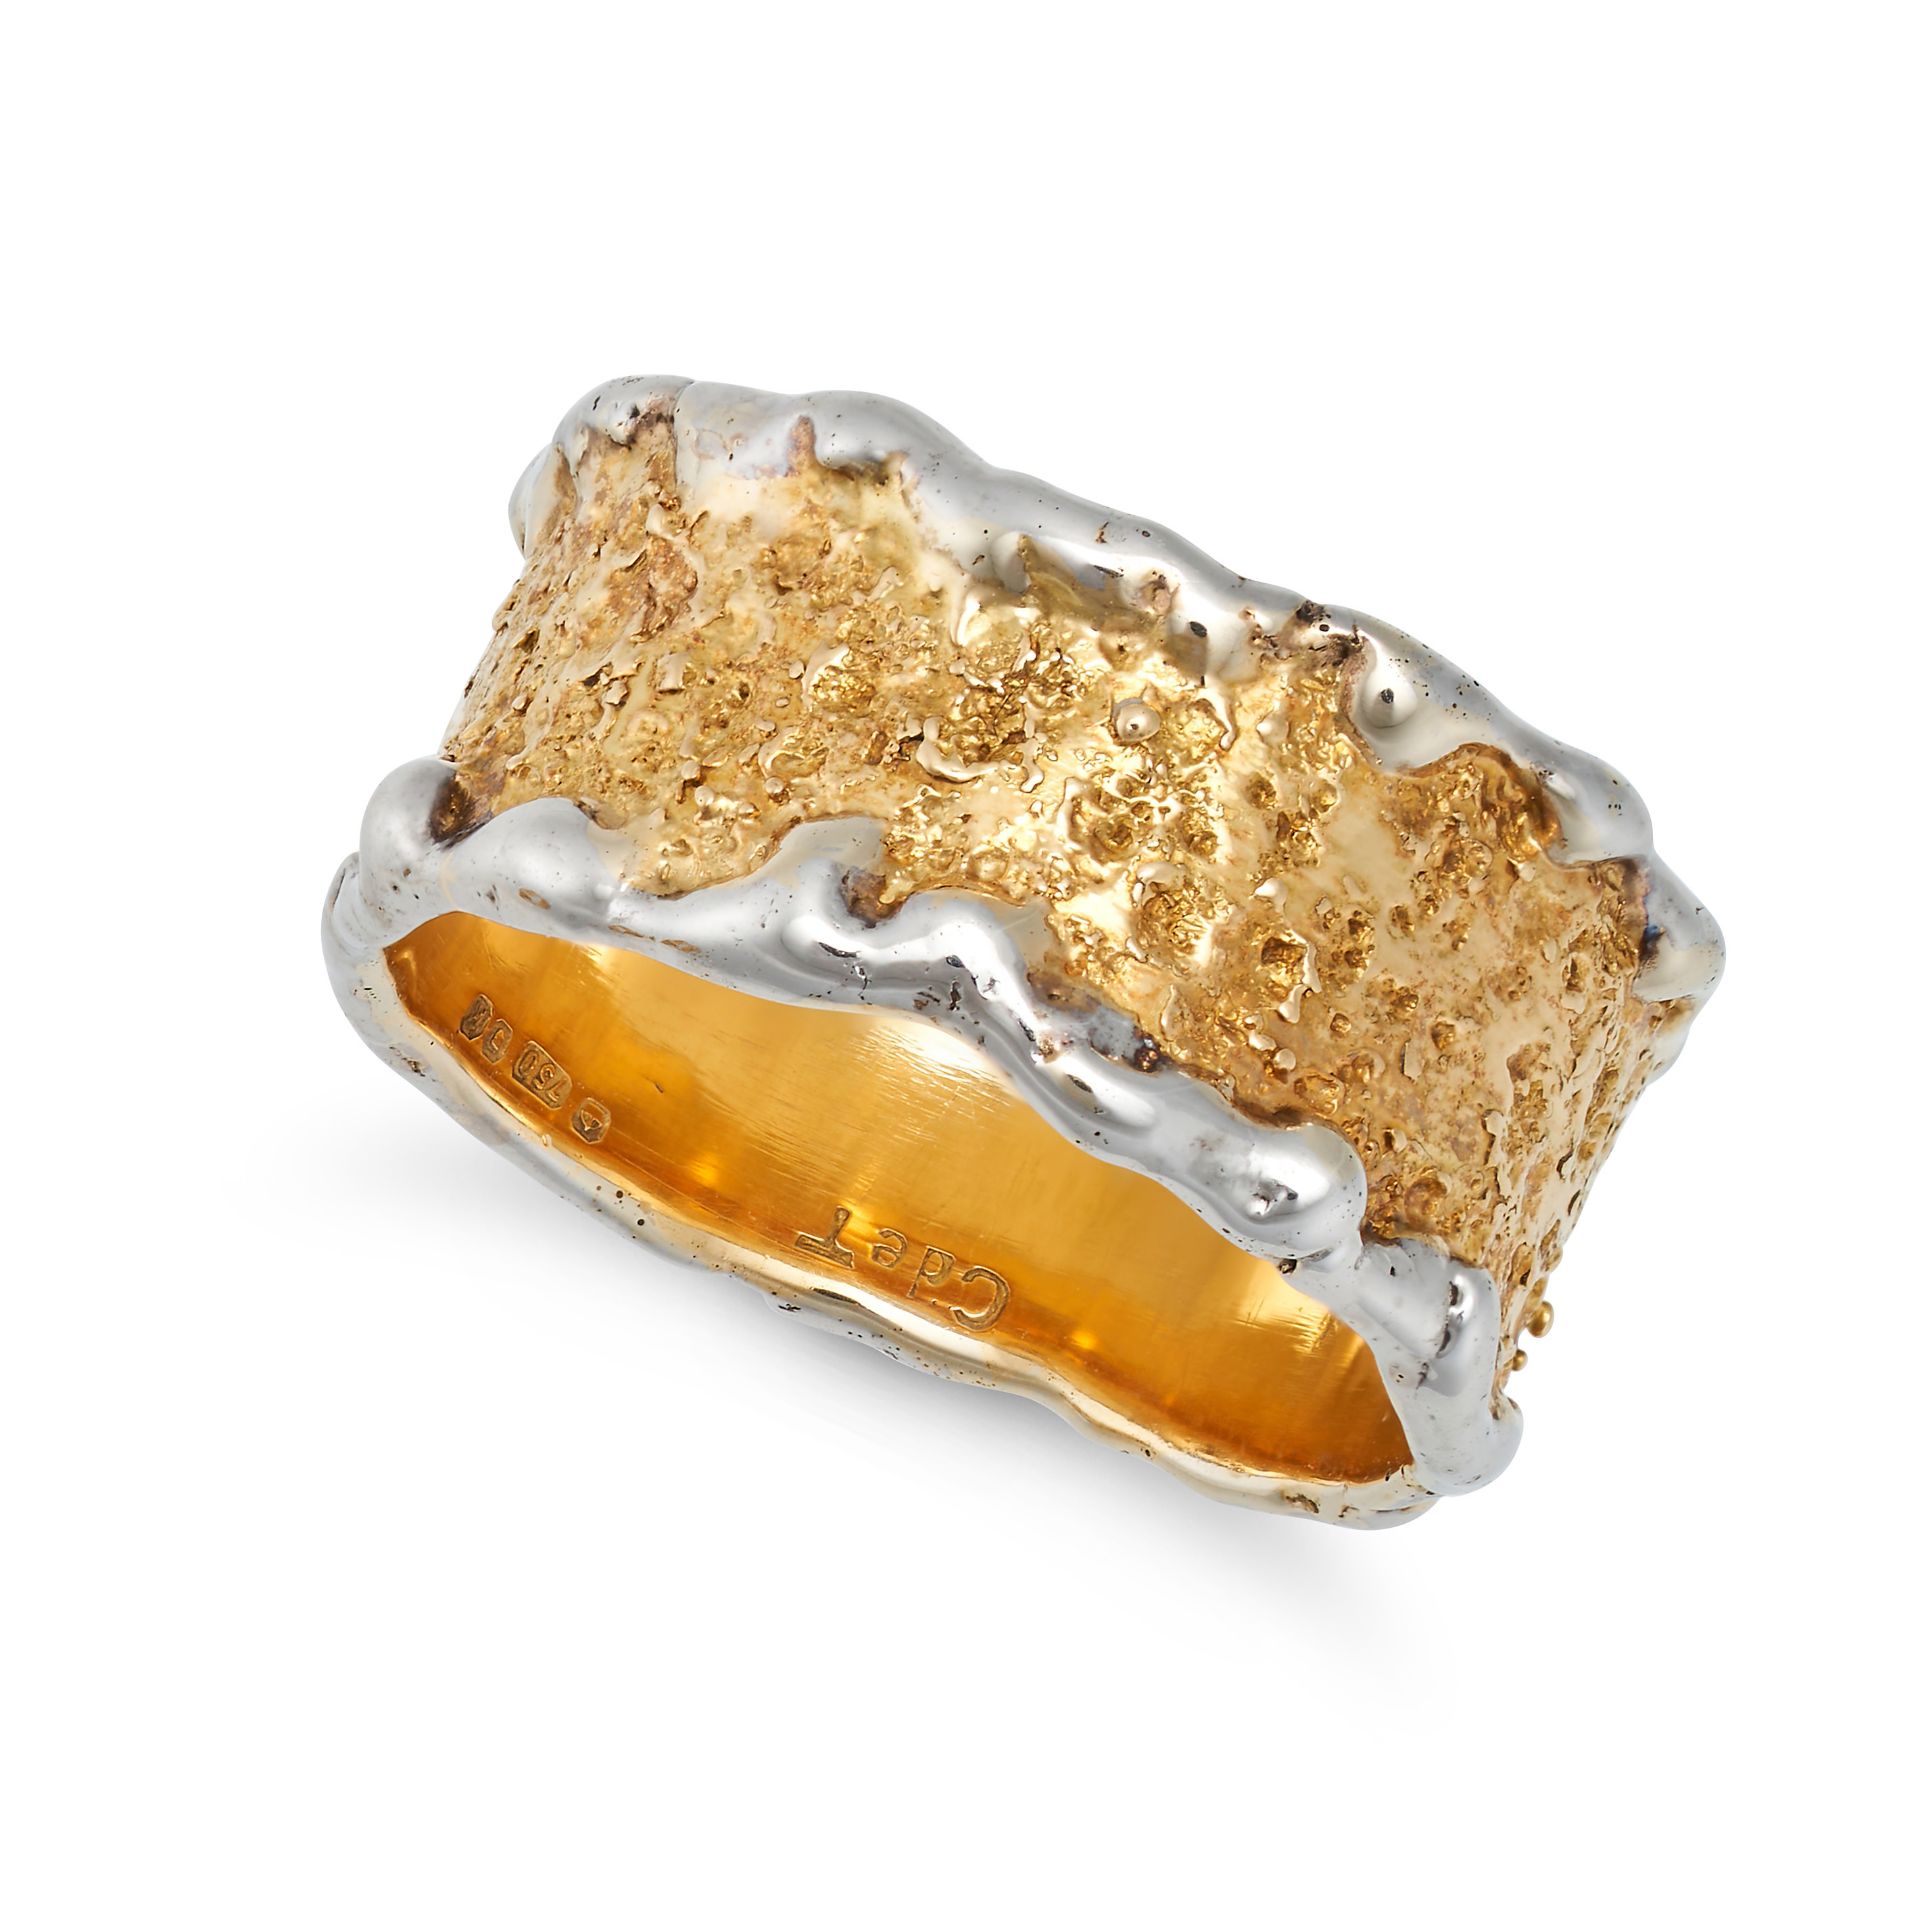 CHARLES DE TEMPLE, A MODERNIST GOLD RING, 1965 in 18ct yellow and white gold, in modernist textur...